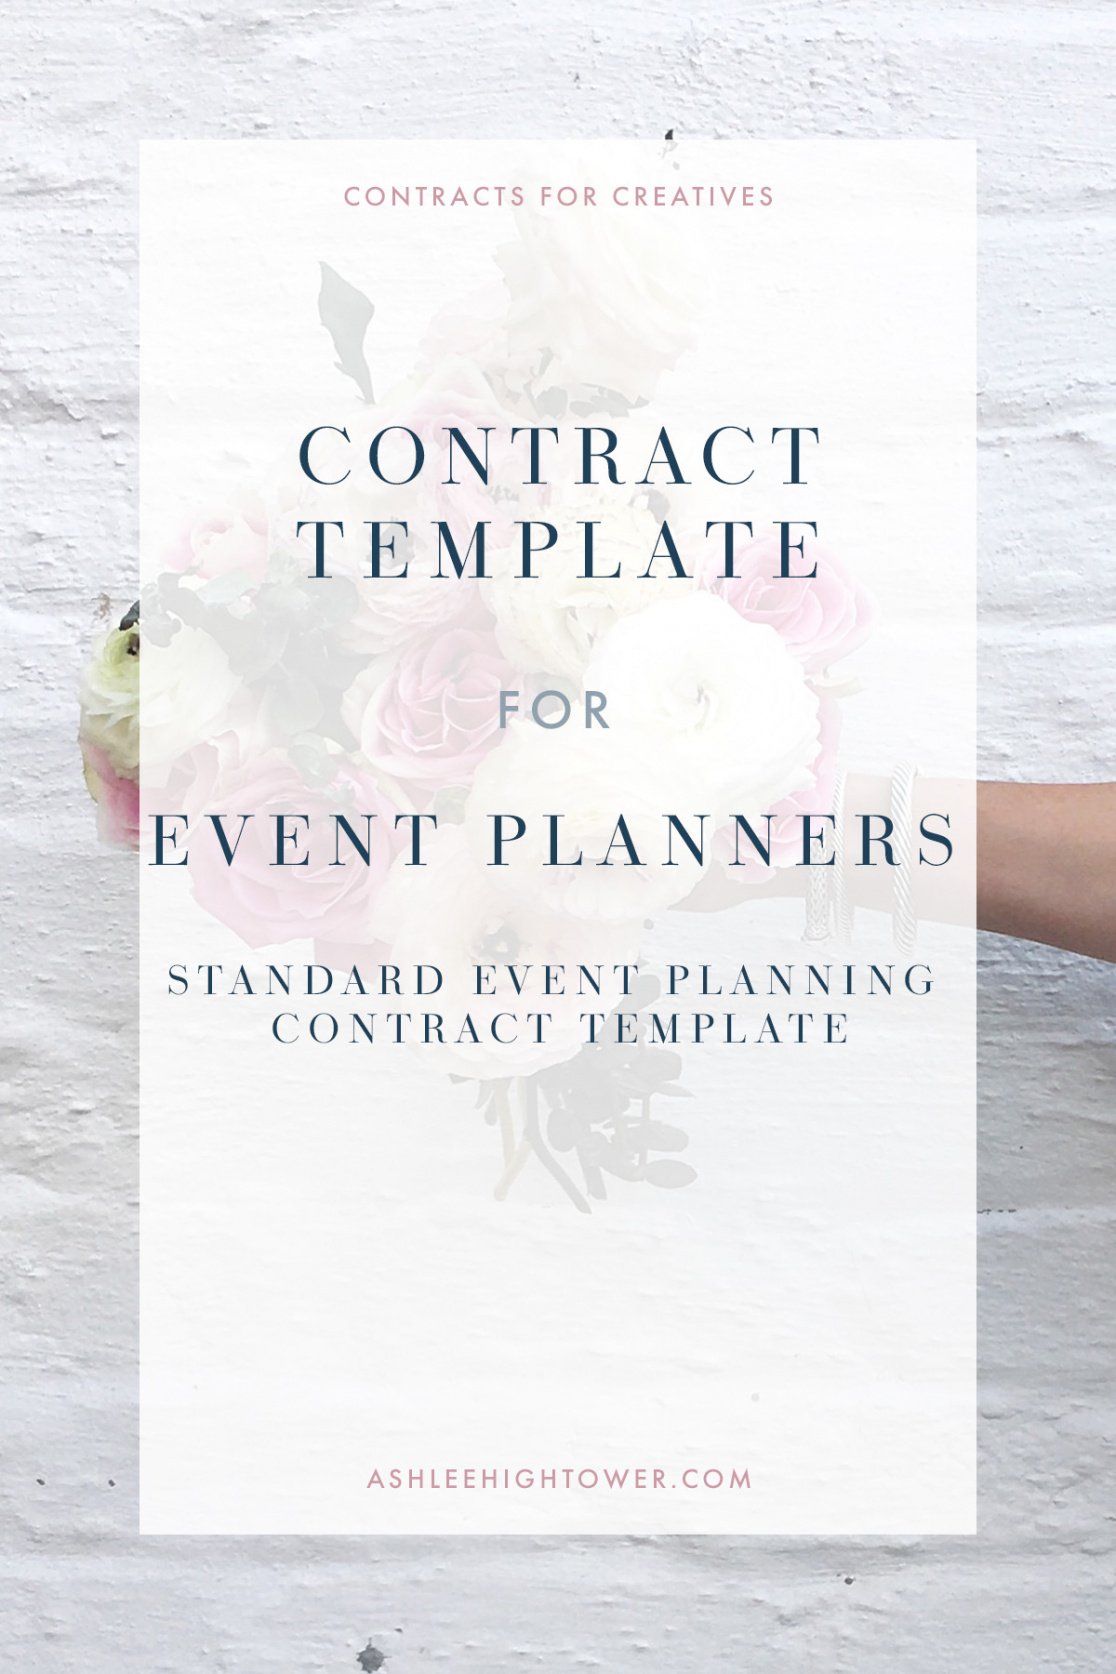 event planner contract template  contract for creatives event management contract template word